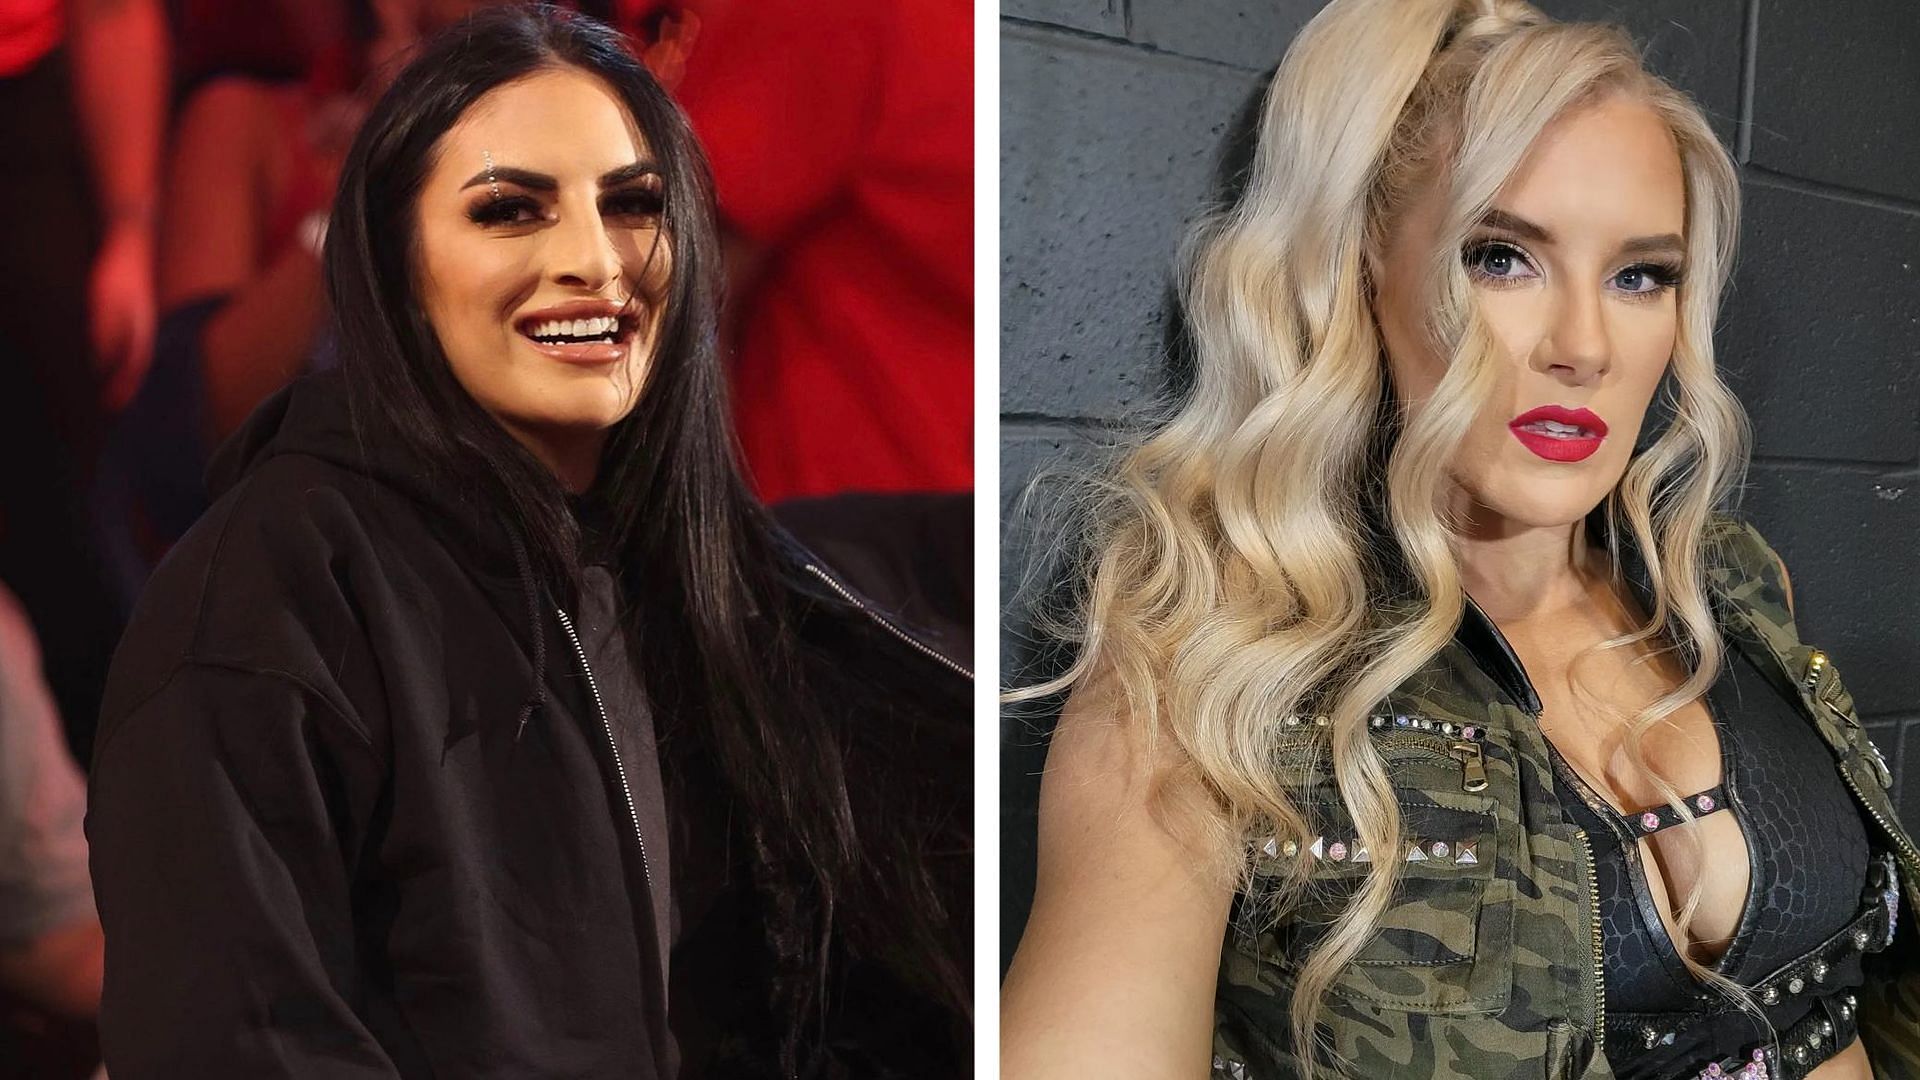 A handful of female superstars could use more screen-time following WWE Survivor Series WarGames